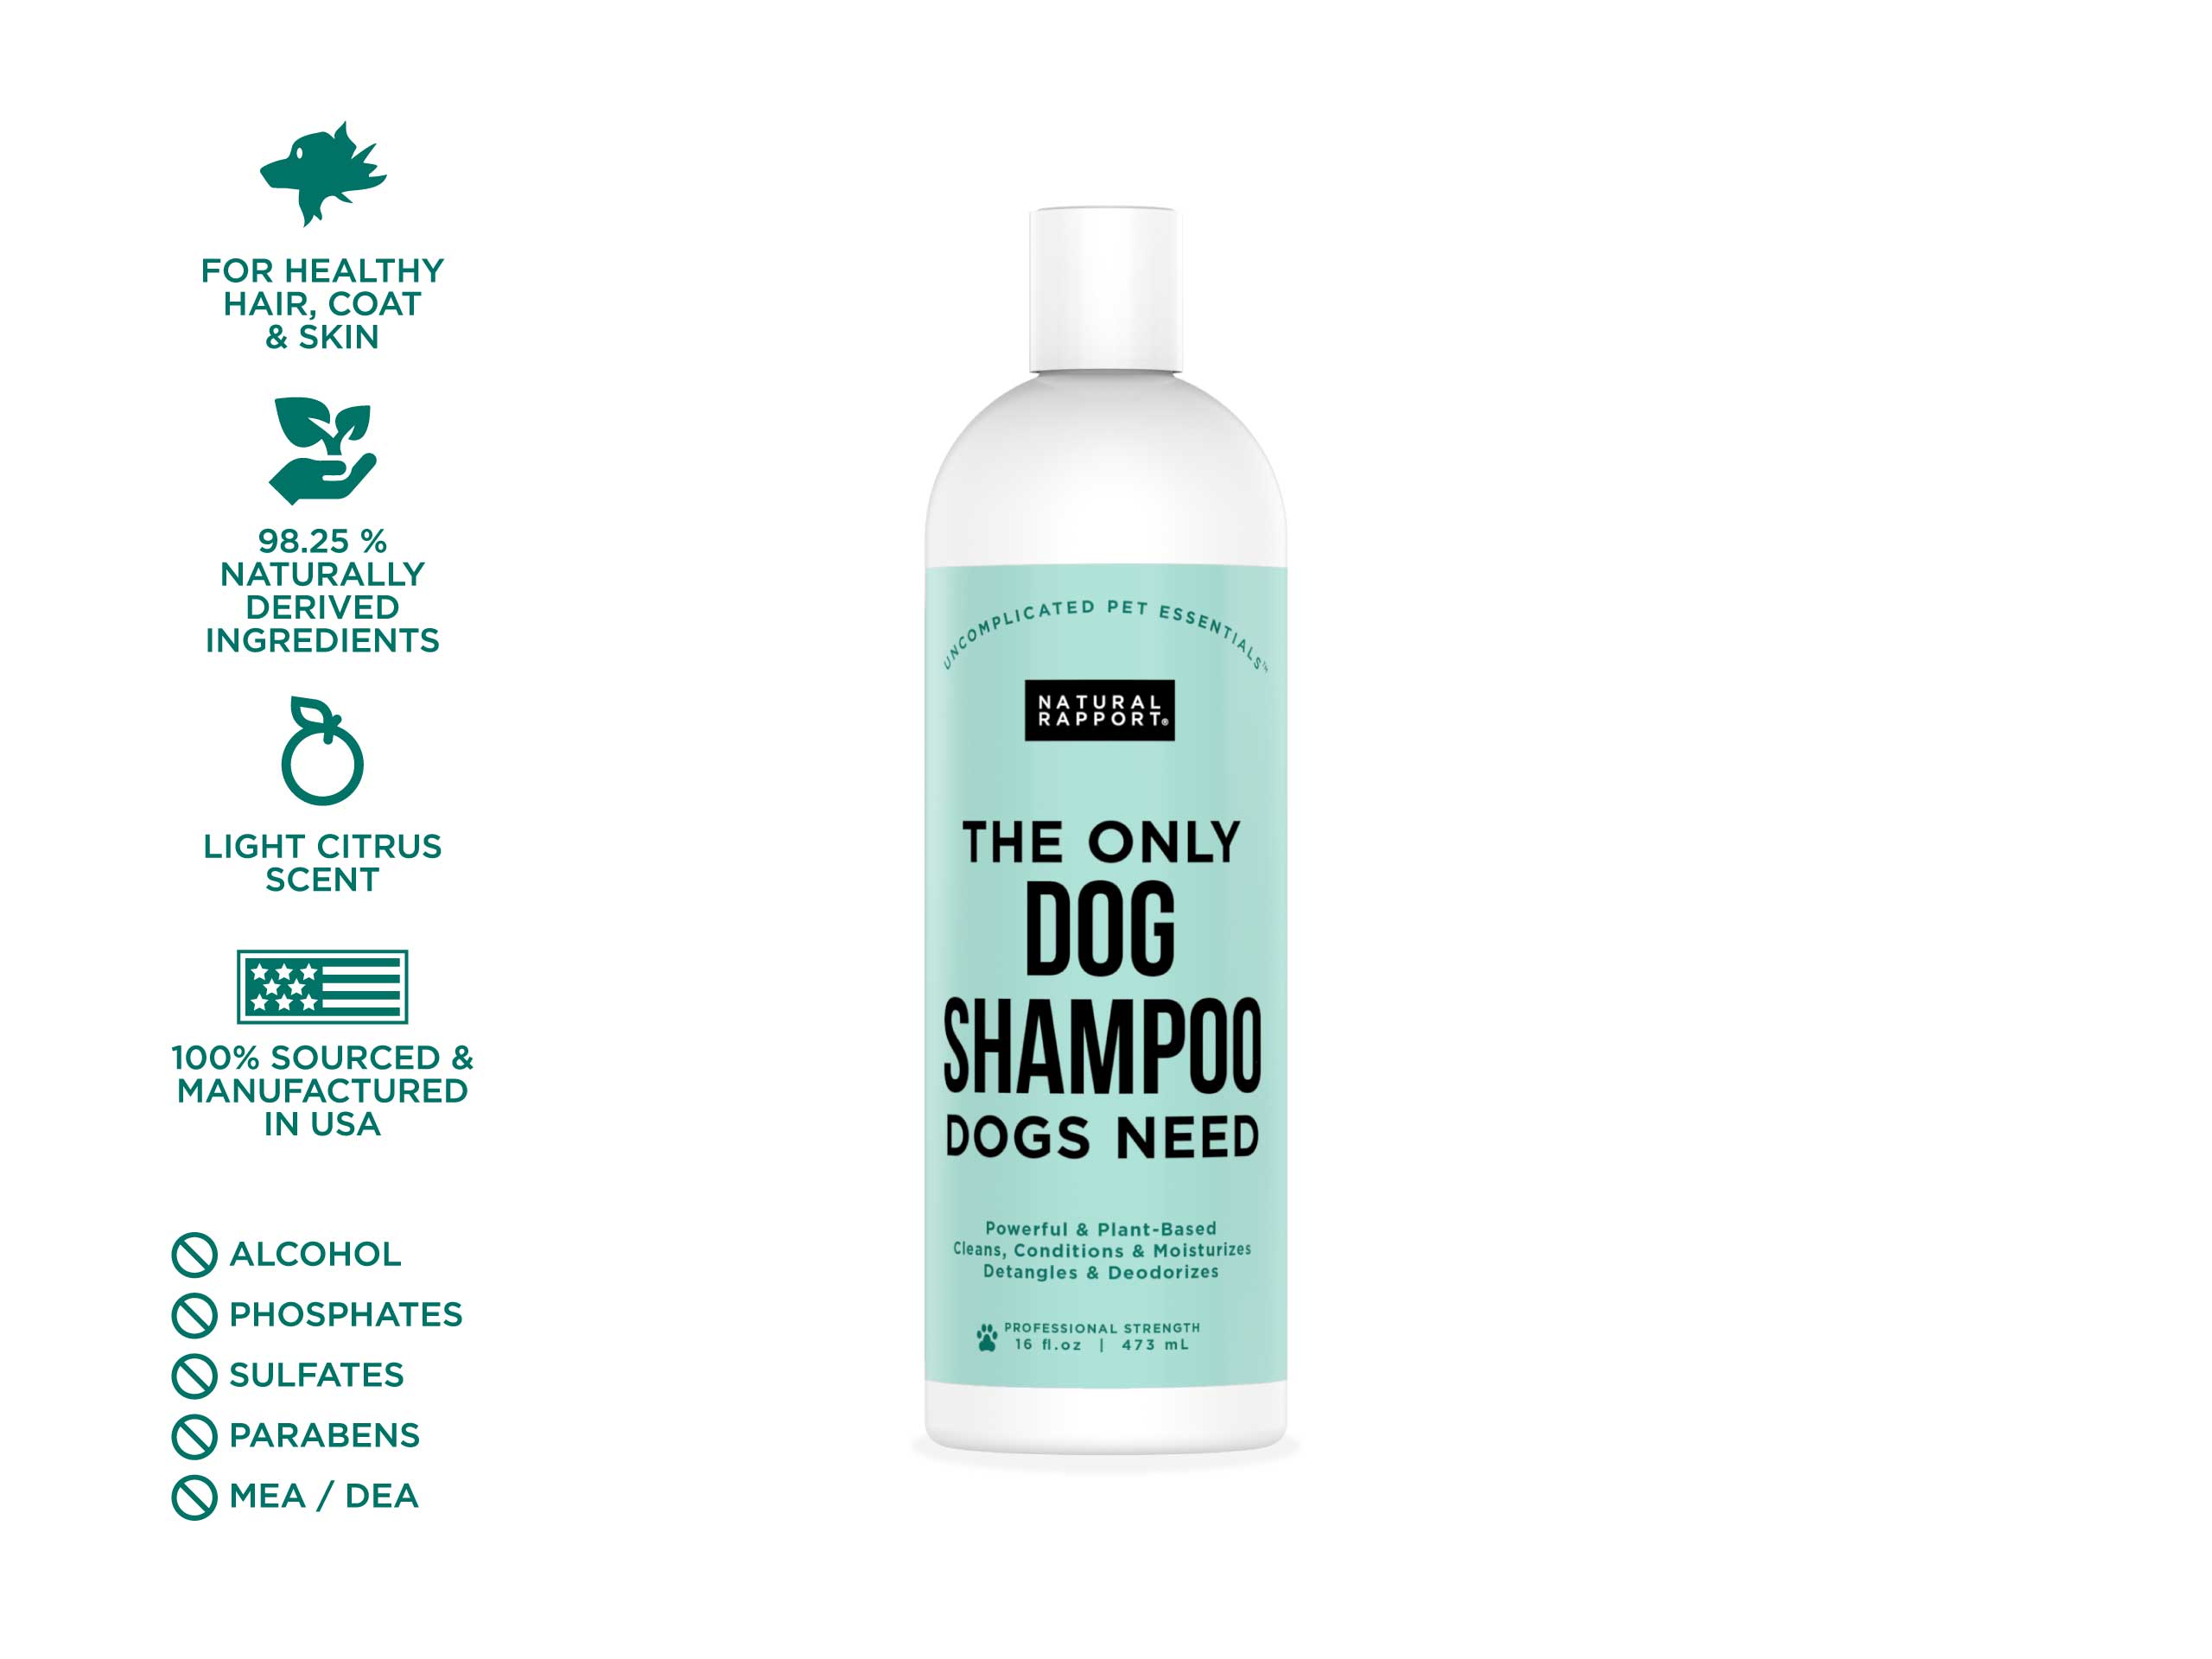 Natural Rapport - The Only Dog Shampoo Dogs Need